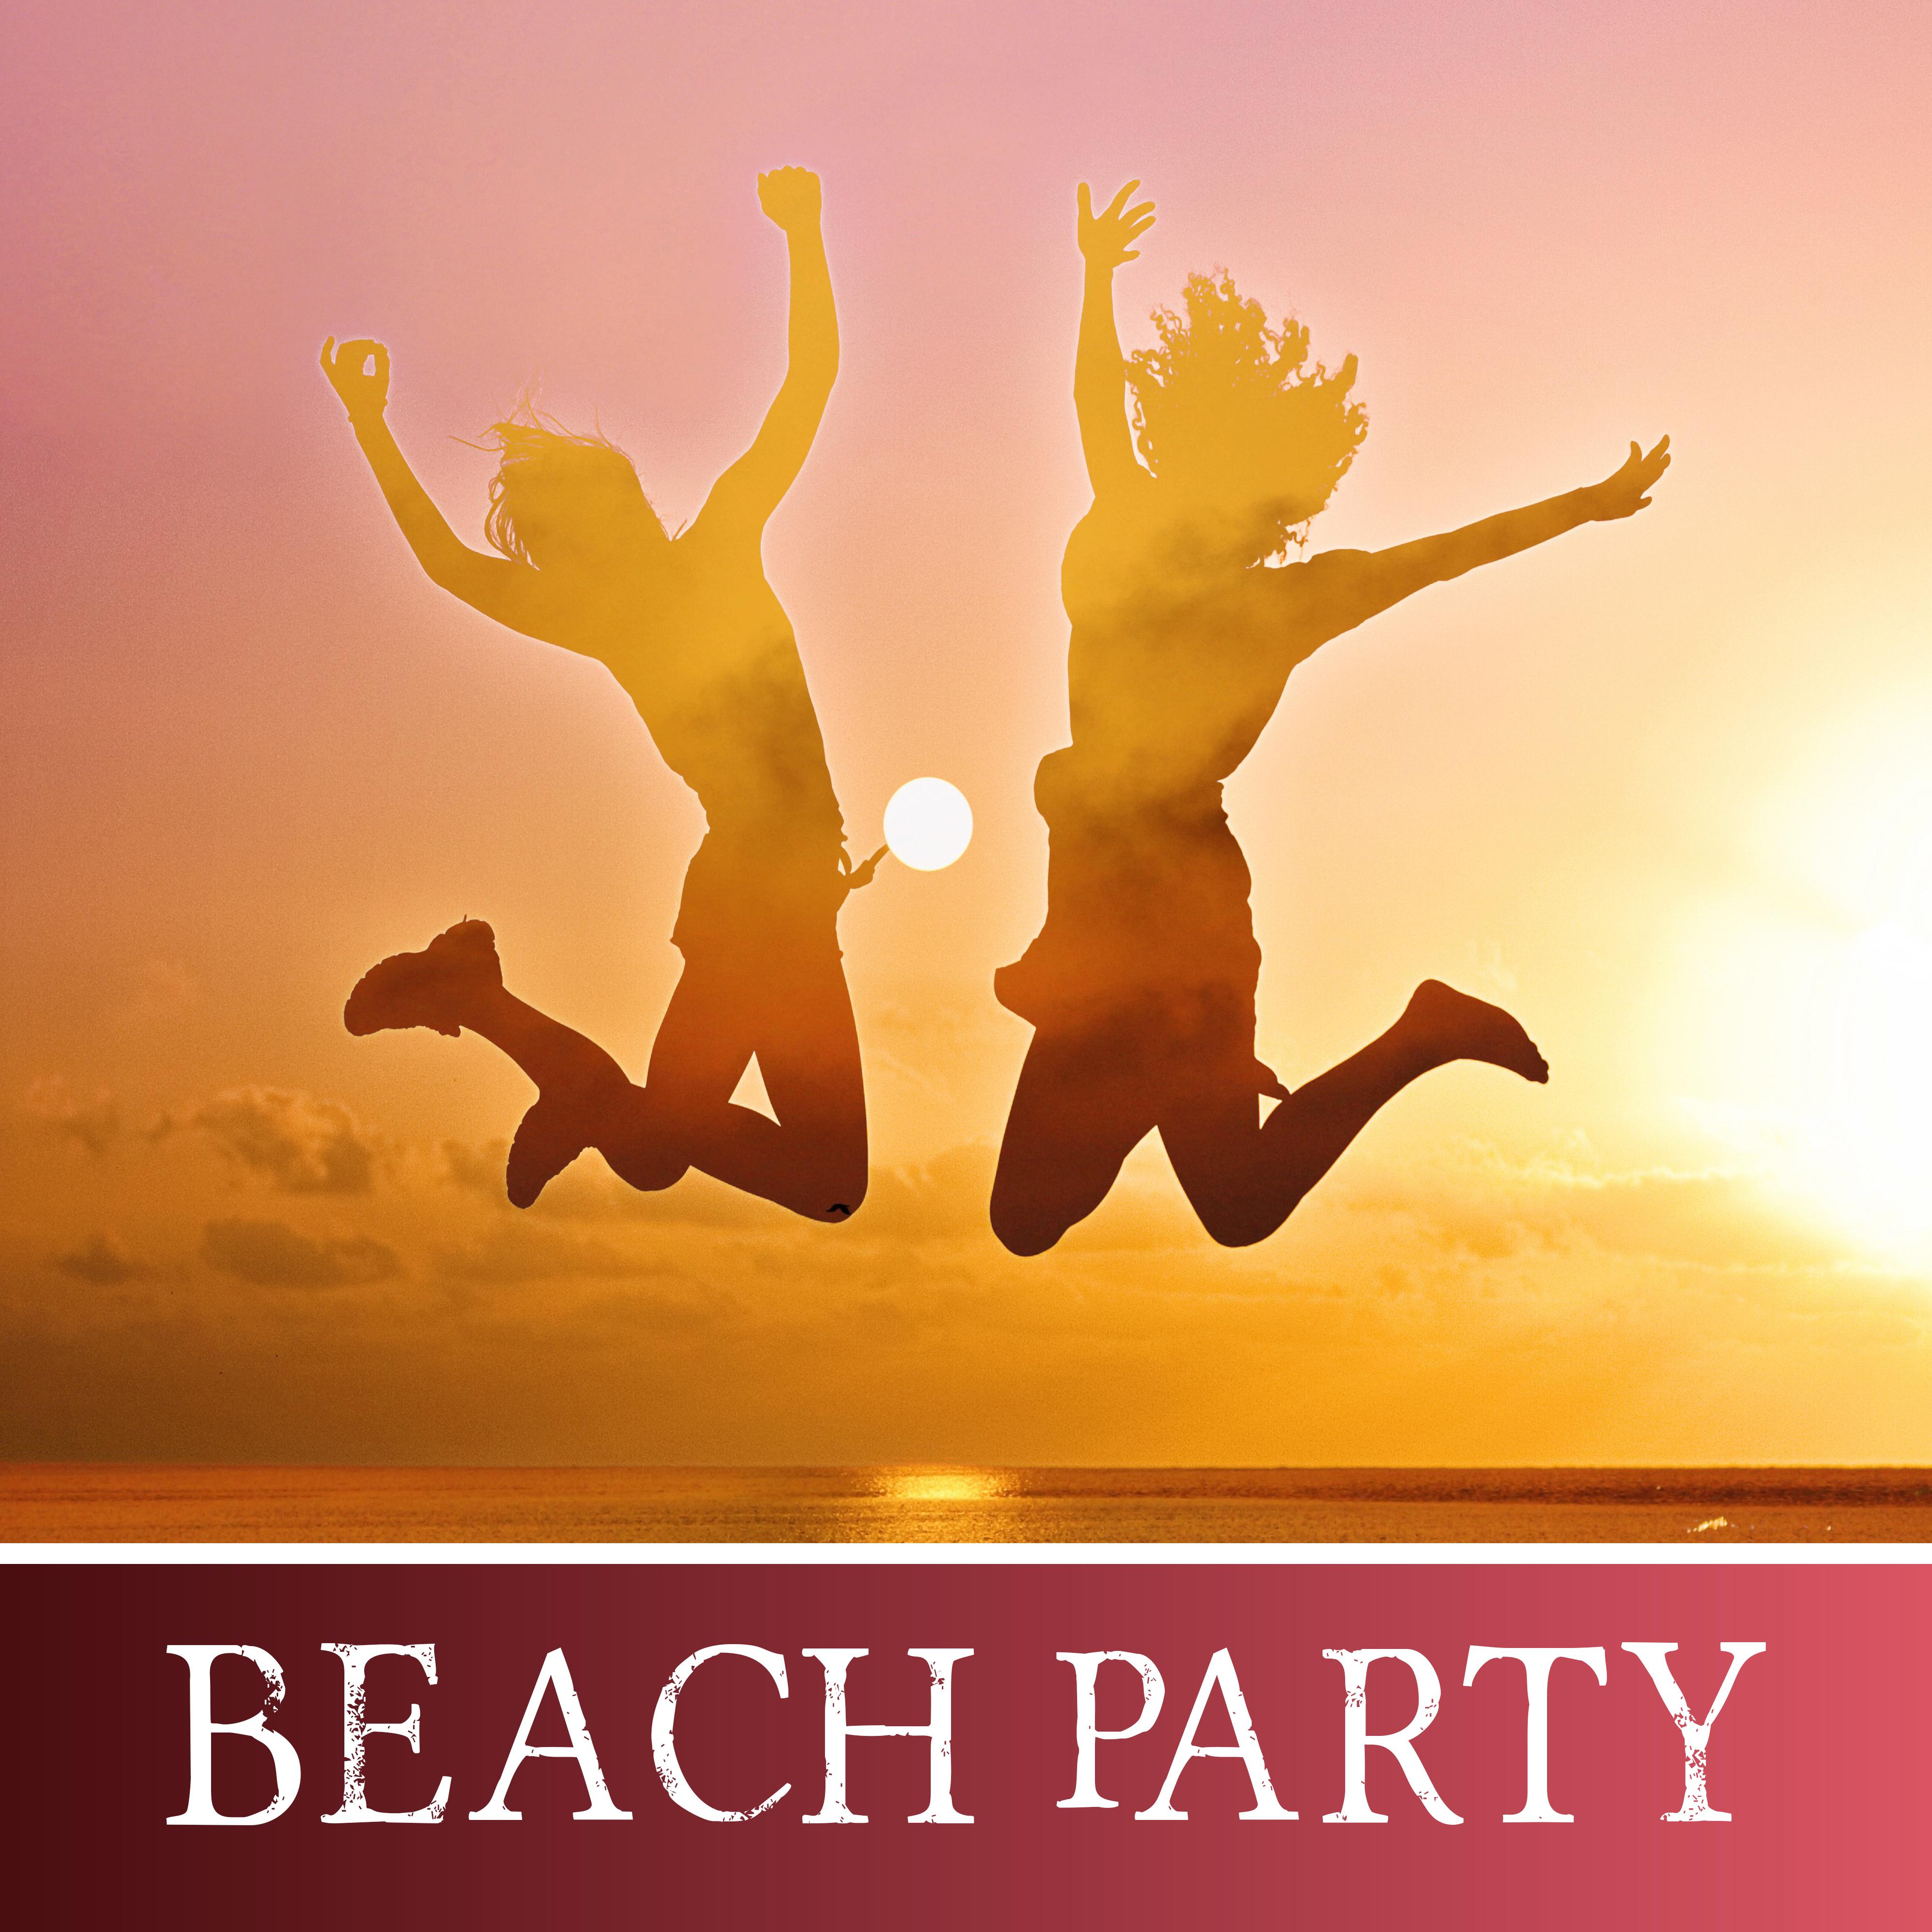 Beach Party – Holiday Chill Out Music, Positive Vibrations, Dance Floor, Ibiza Lounge, Cocktail Party, Relaxation, Summer Chill